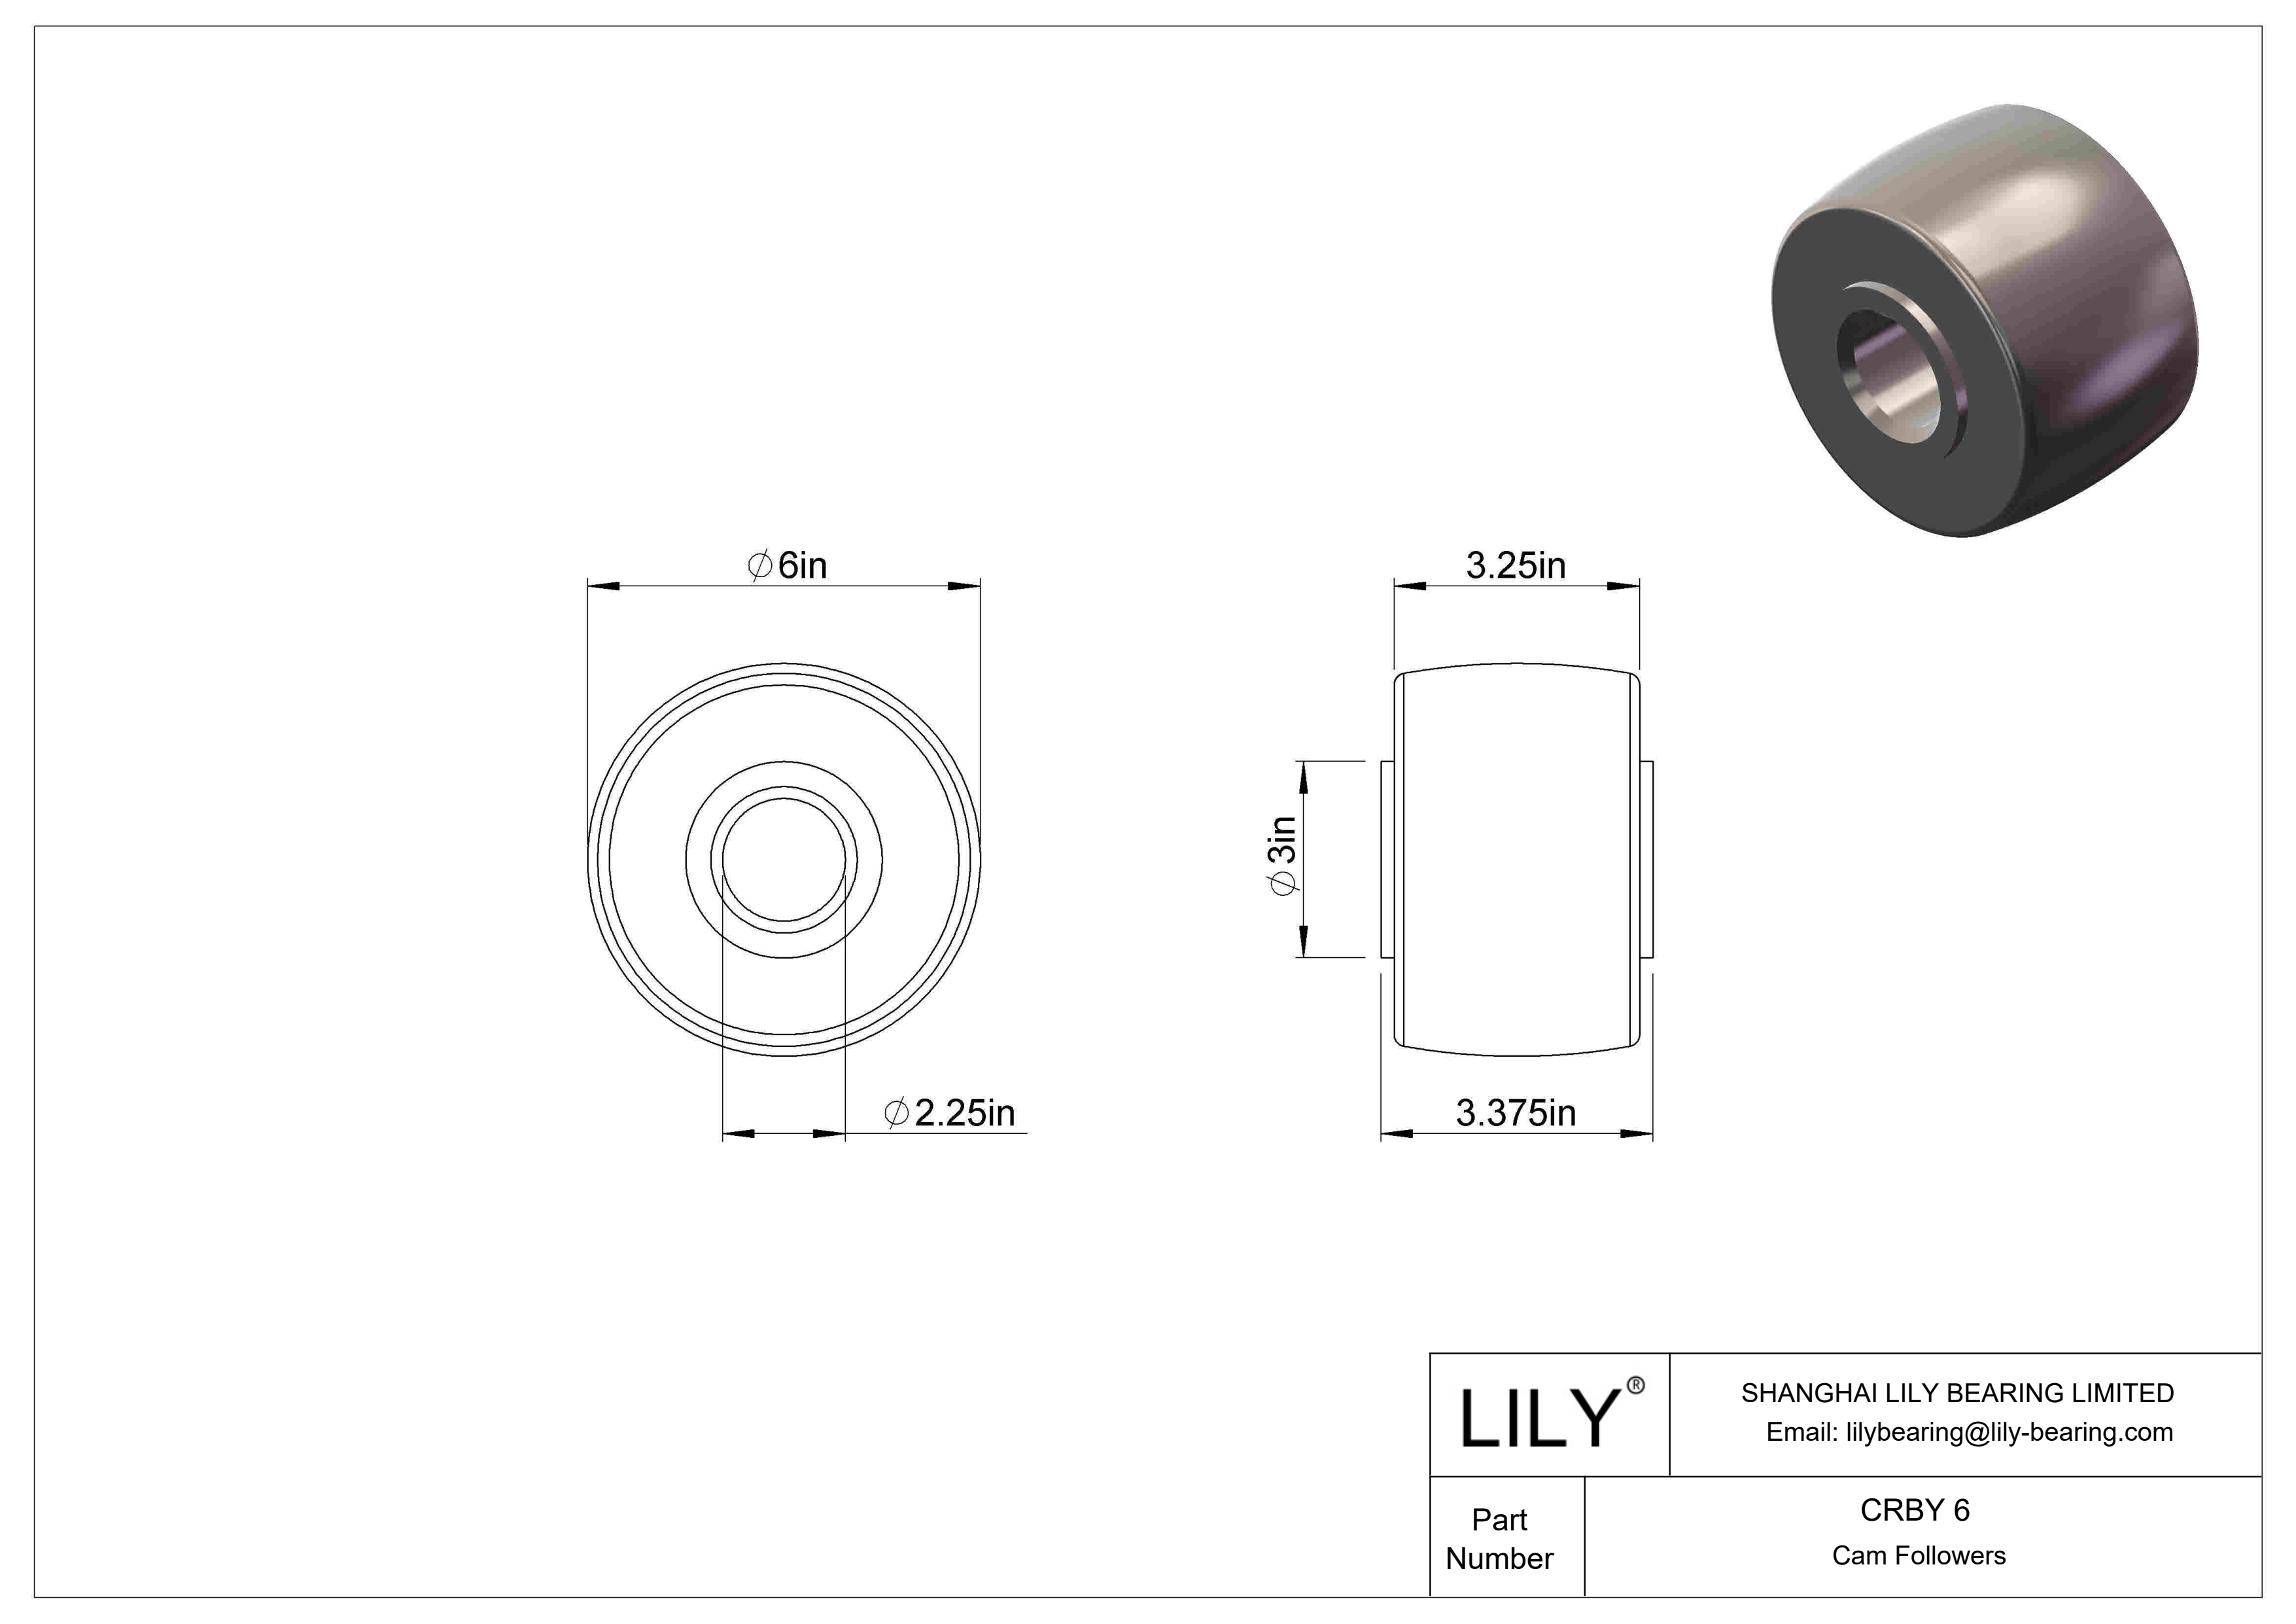 CRBY 6 Roller Cam Follower-Yoke Type cad drawing